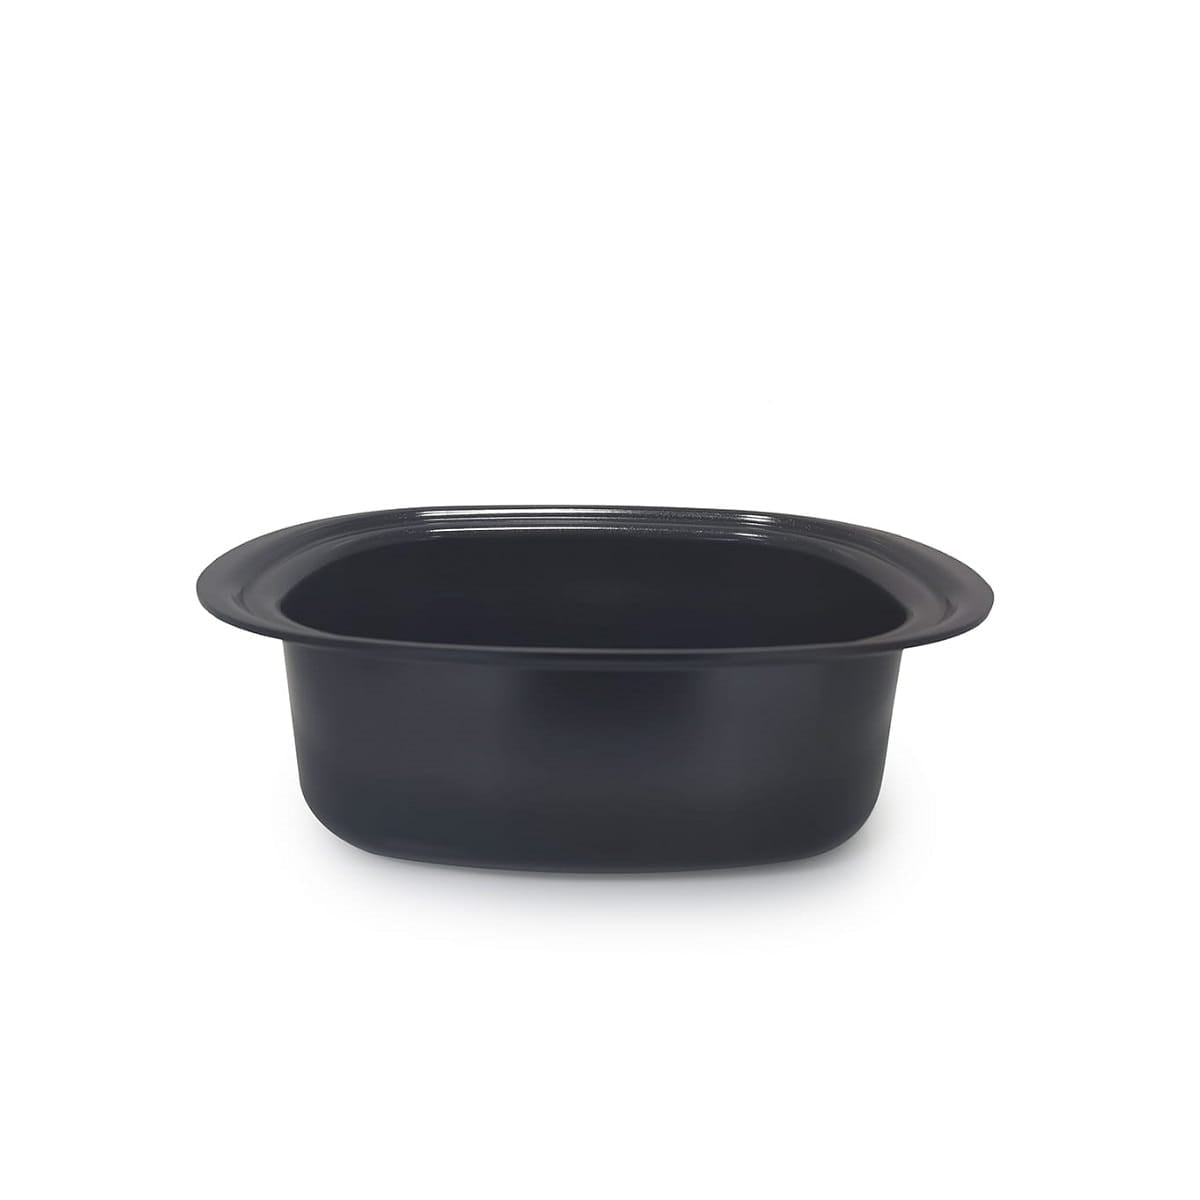 All-Clad Replacement Ceramic Insert for Slow Cooker - Black(1500990903) 